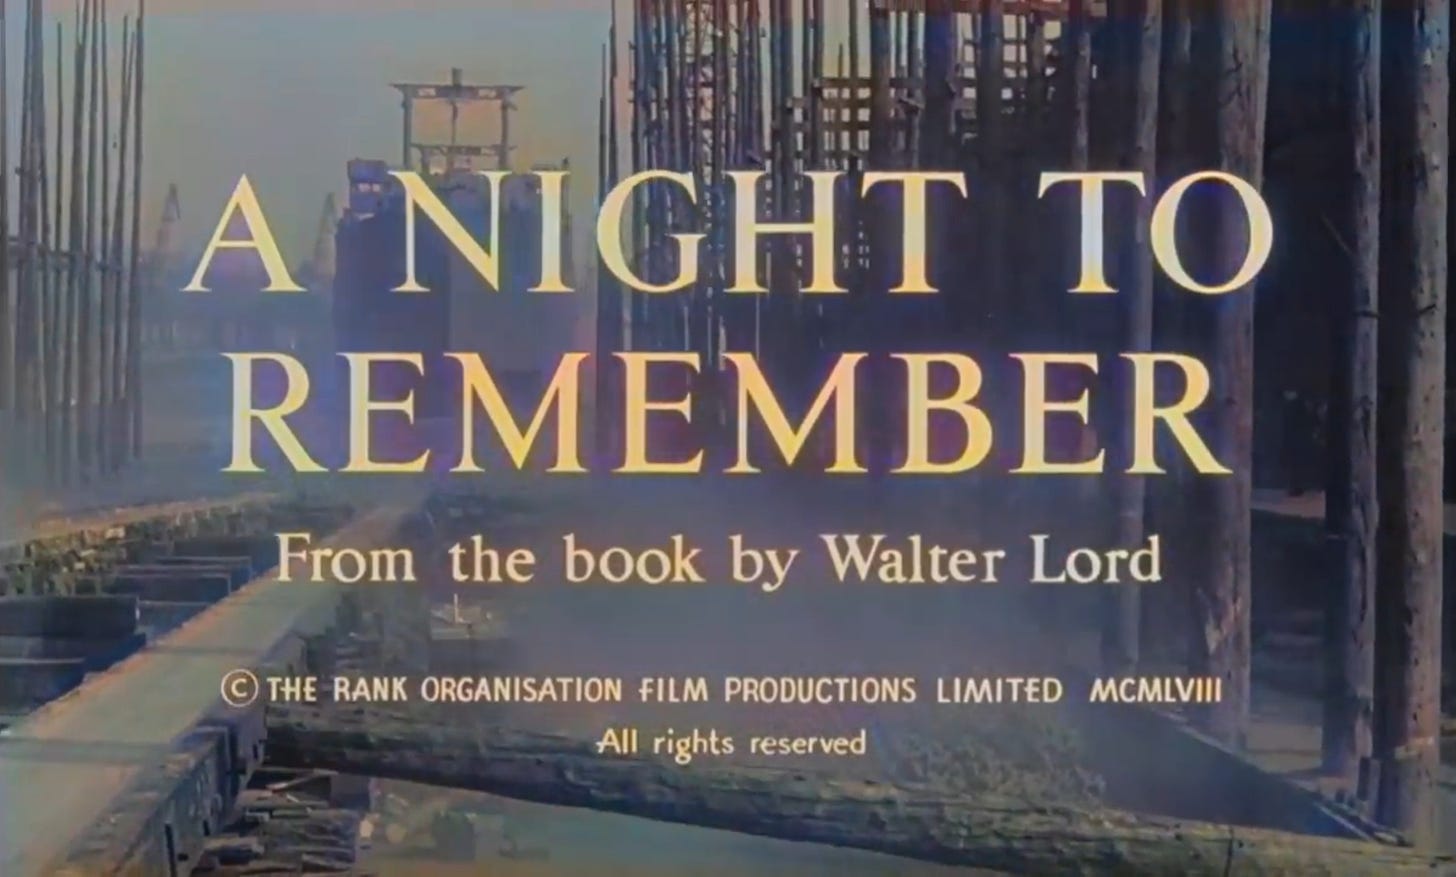 A night to remember (1958) title screen.